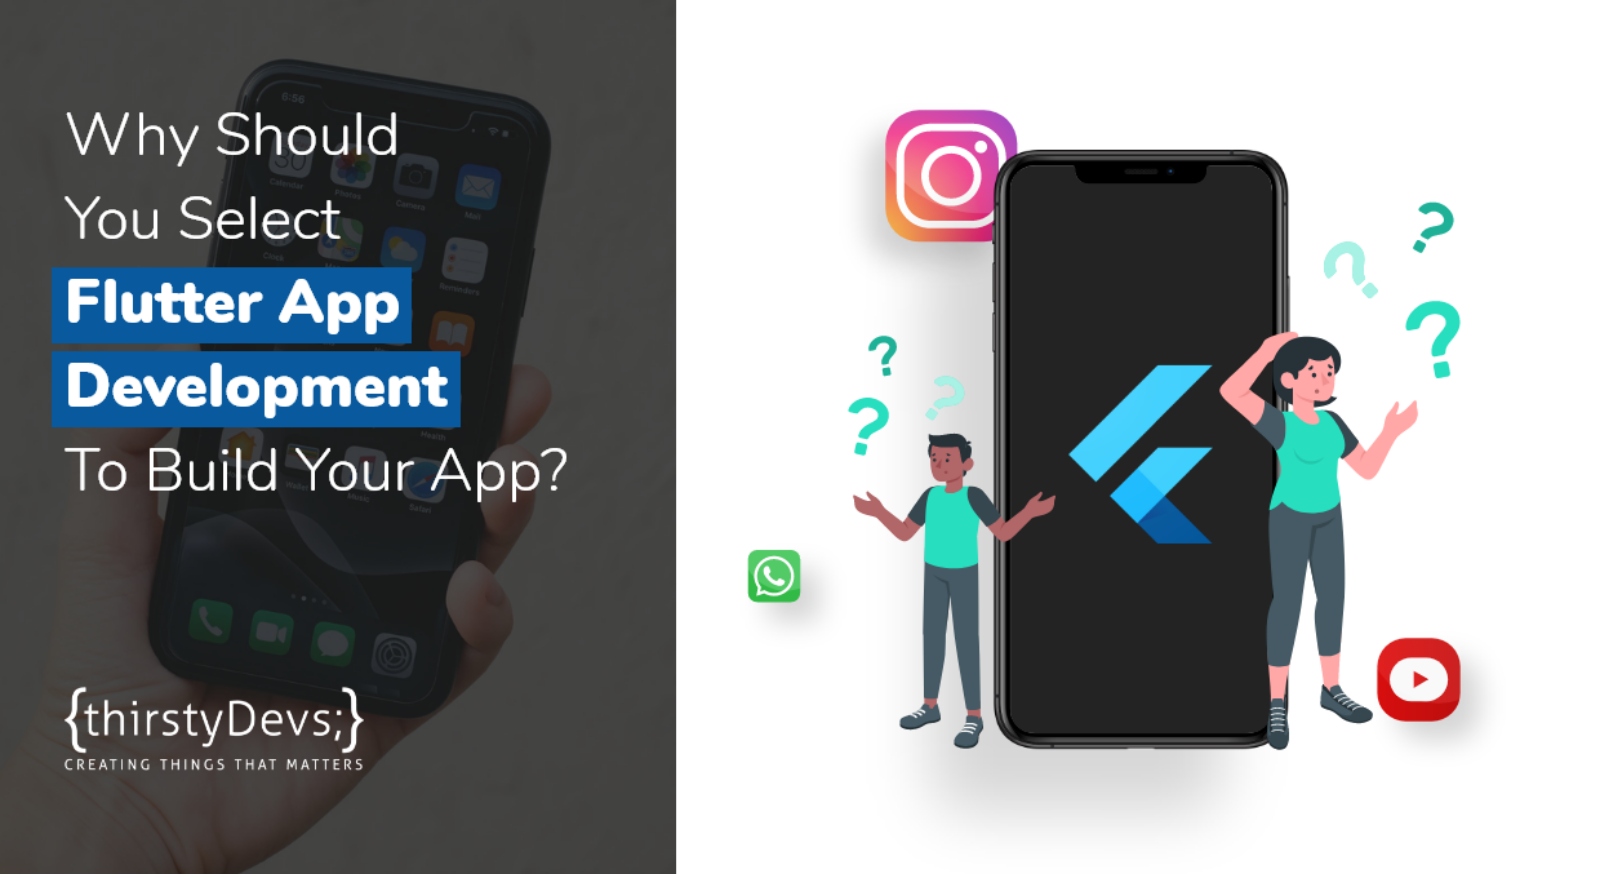 Why Should You Select Flutter App Development To Build Your App?